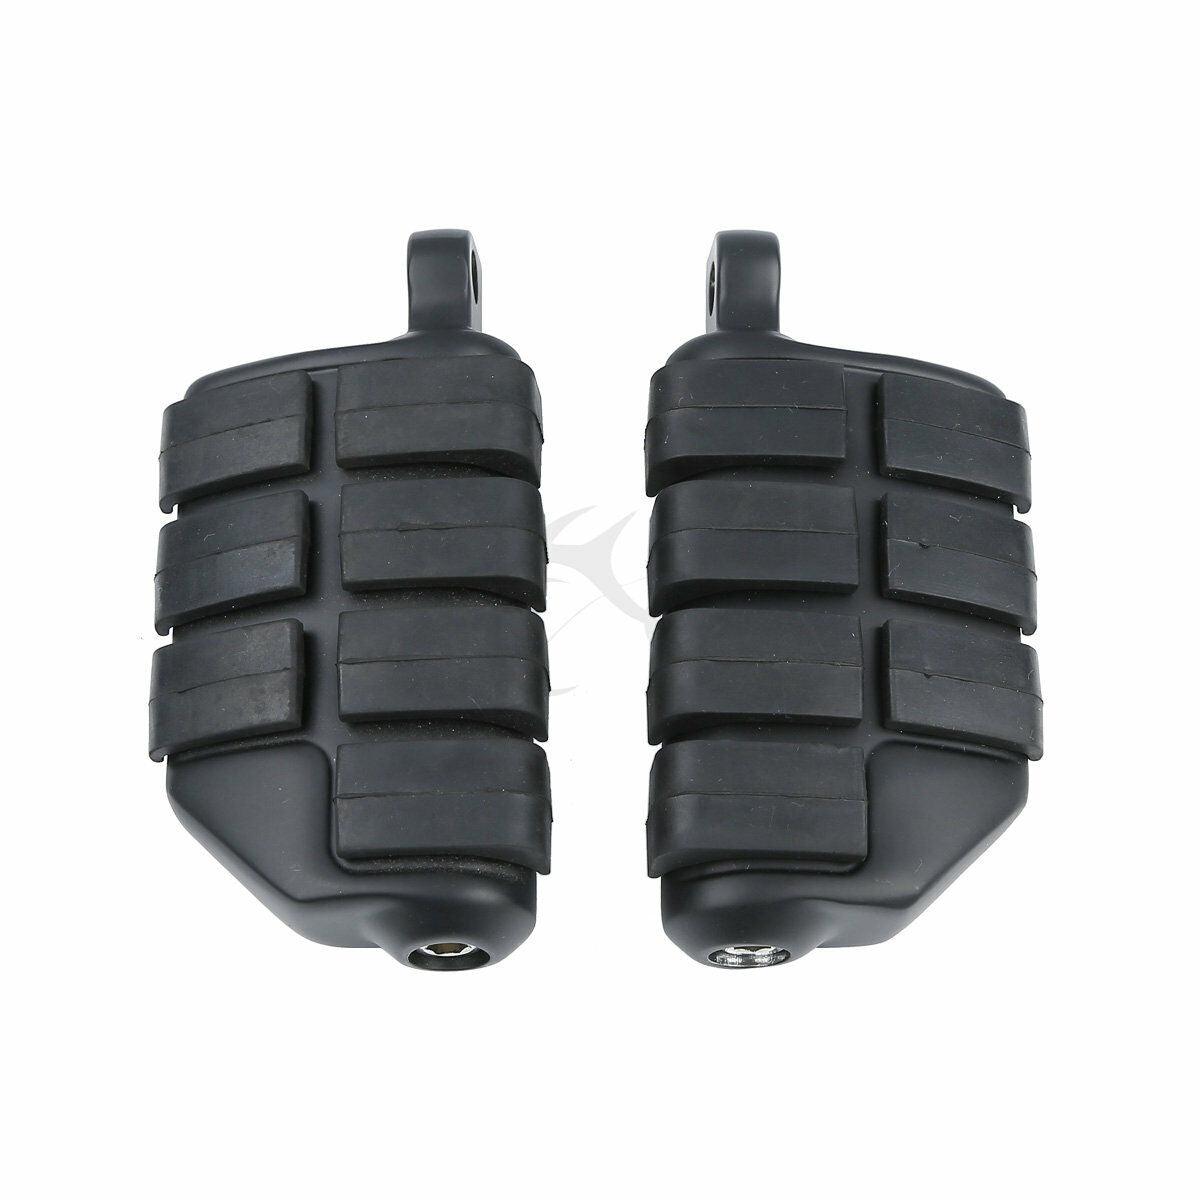 Matte Black Male Mount FootPegs Rest Fit For Harley Touring Road King Sportster - Moto Life Products